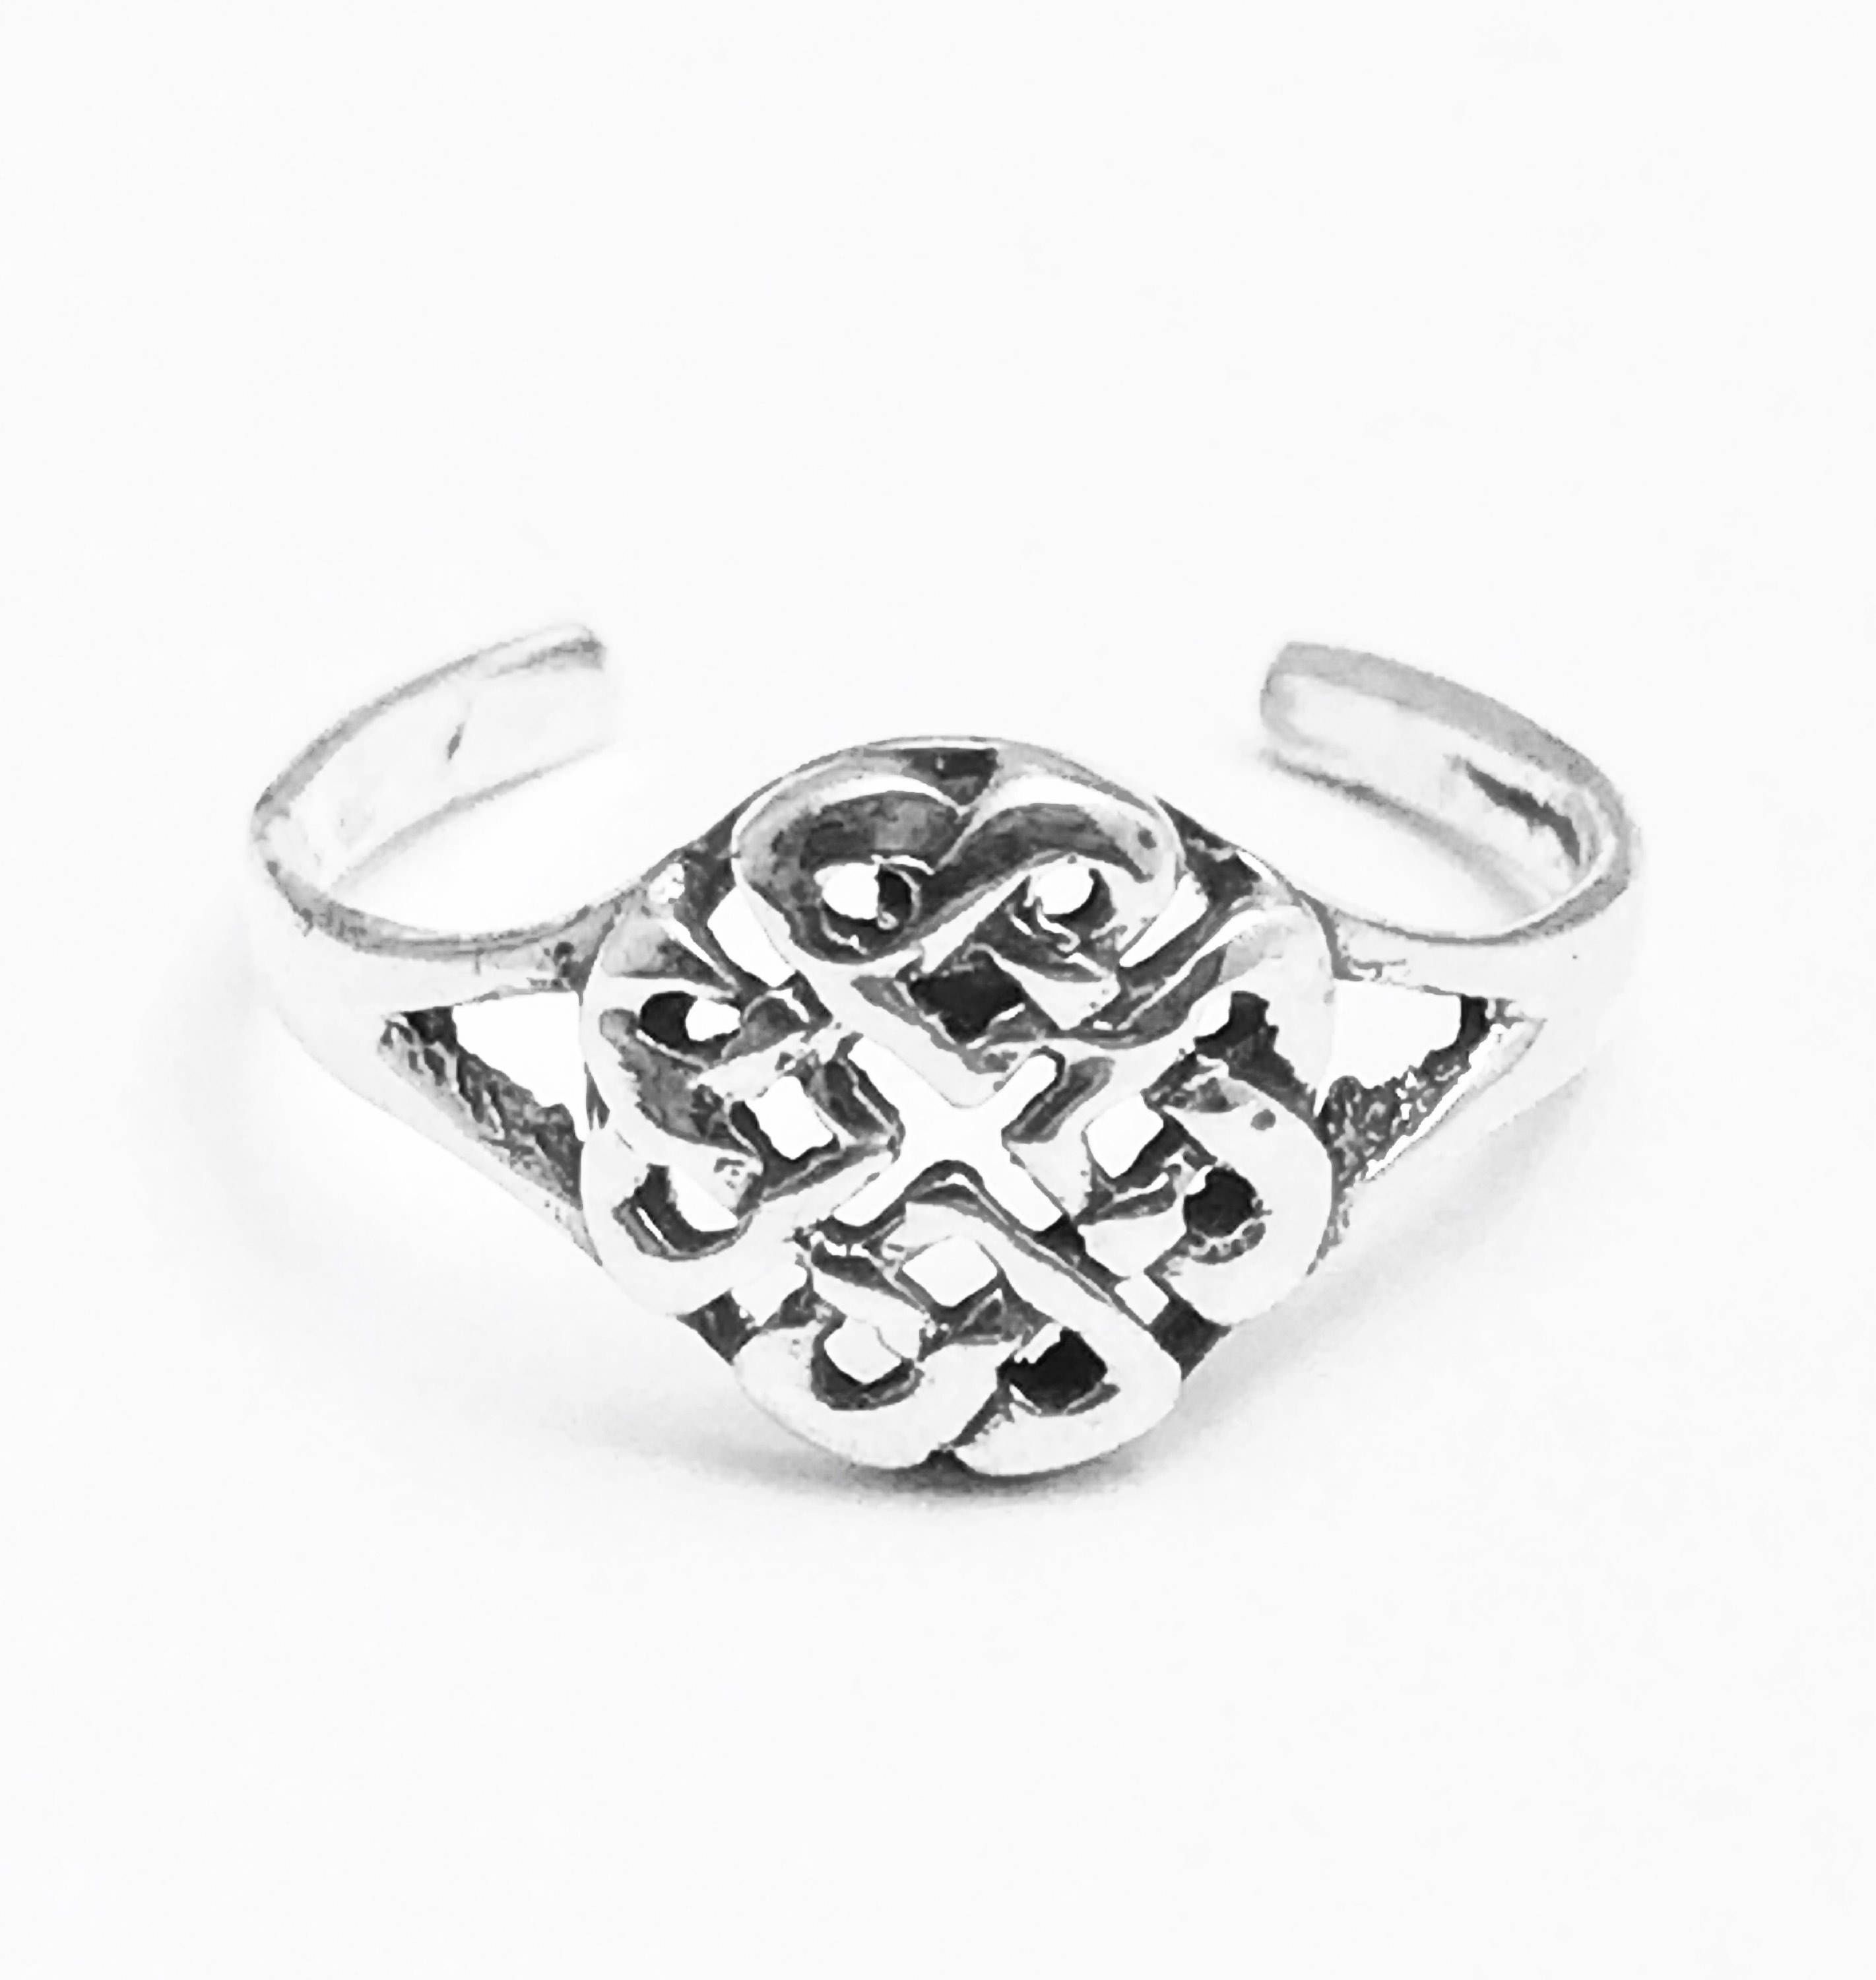 Sterling Silver Celtic Heart Entwined Toe Rings (View 11 of 15)